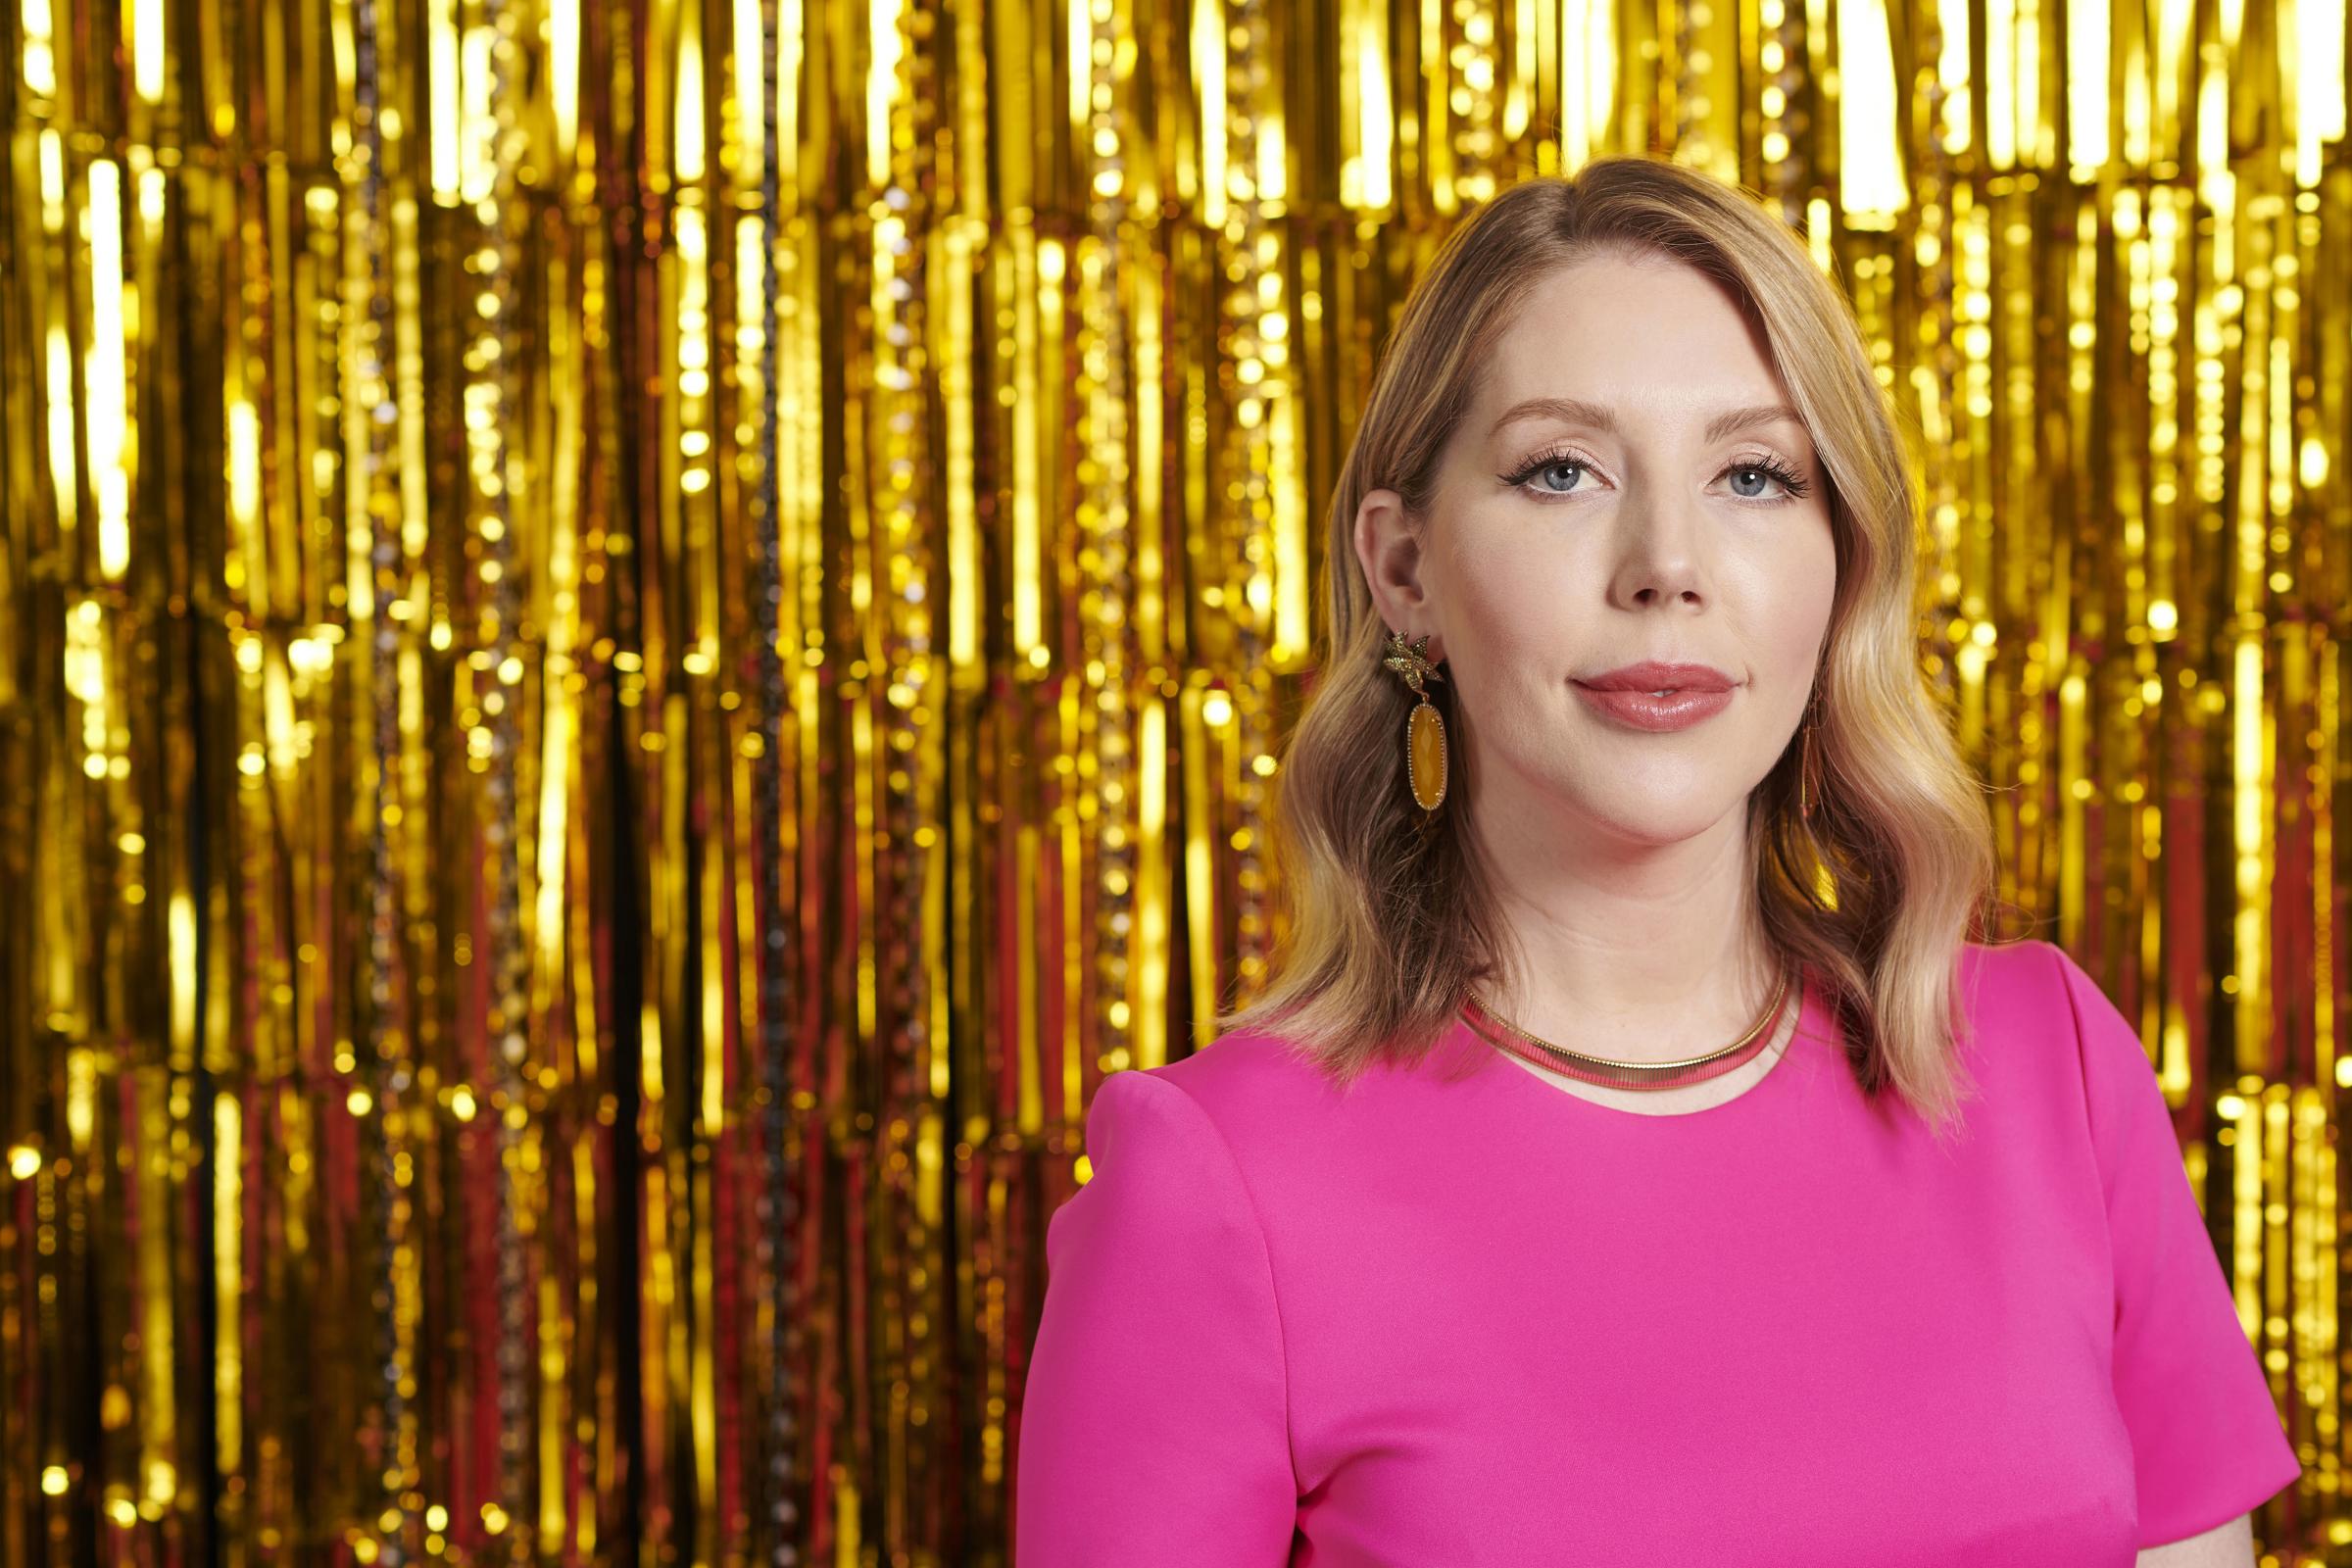 All That Glitters: Britains Next Jewellery Star is presented by Katherine Ryan